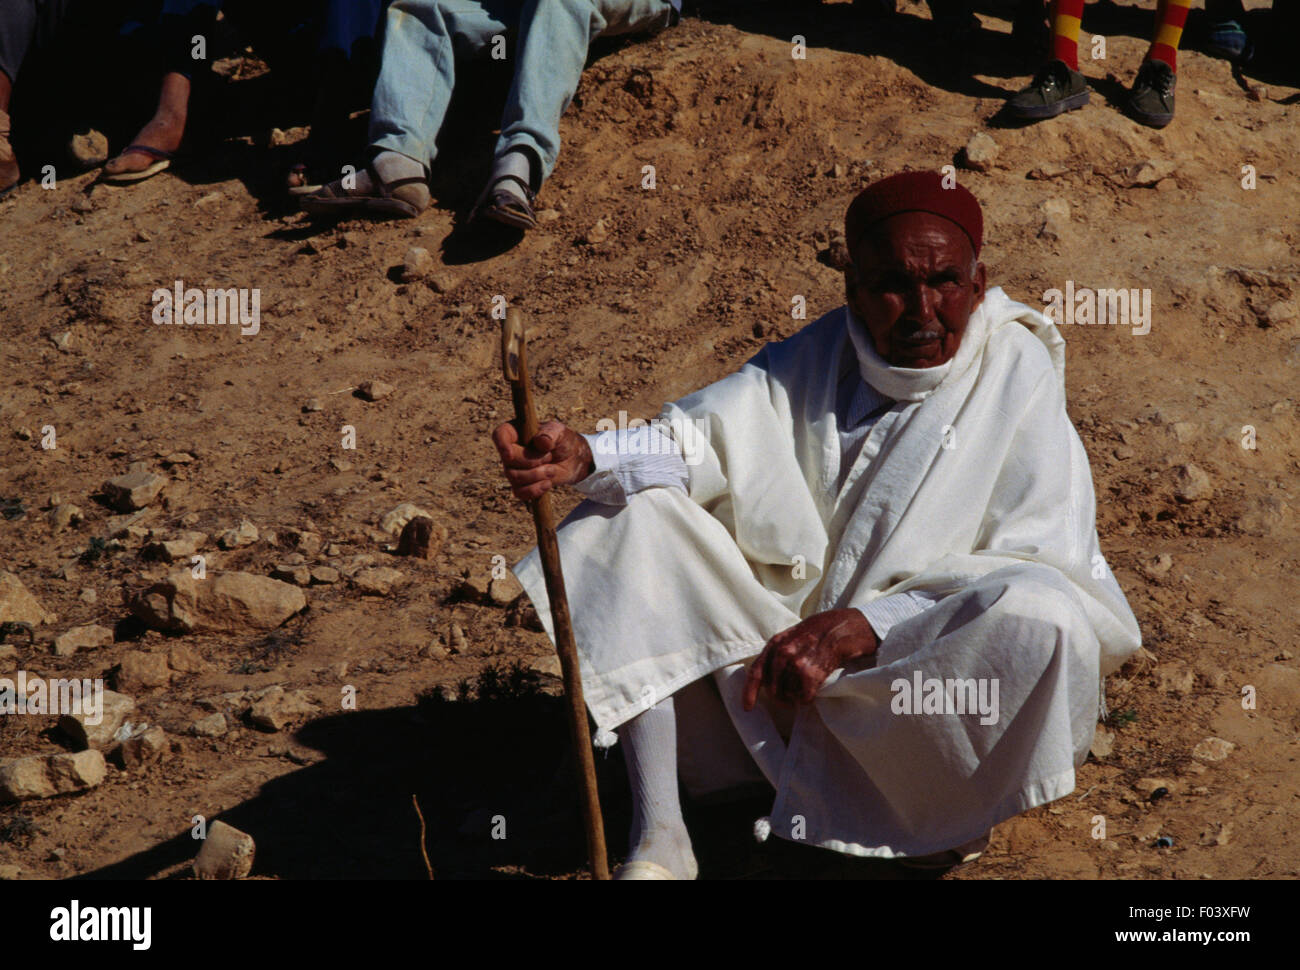 Man in traditional clothes sitting on the ground, Matmata Berber festival, Tunisia. Stock Photo